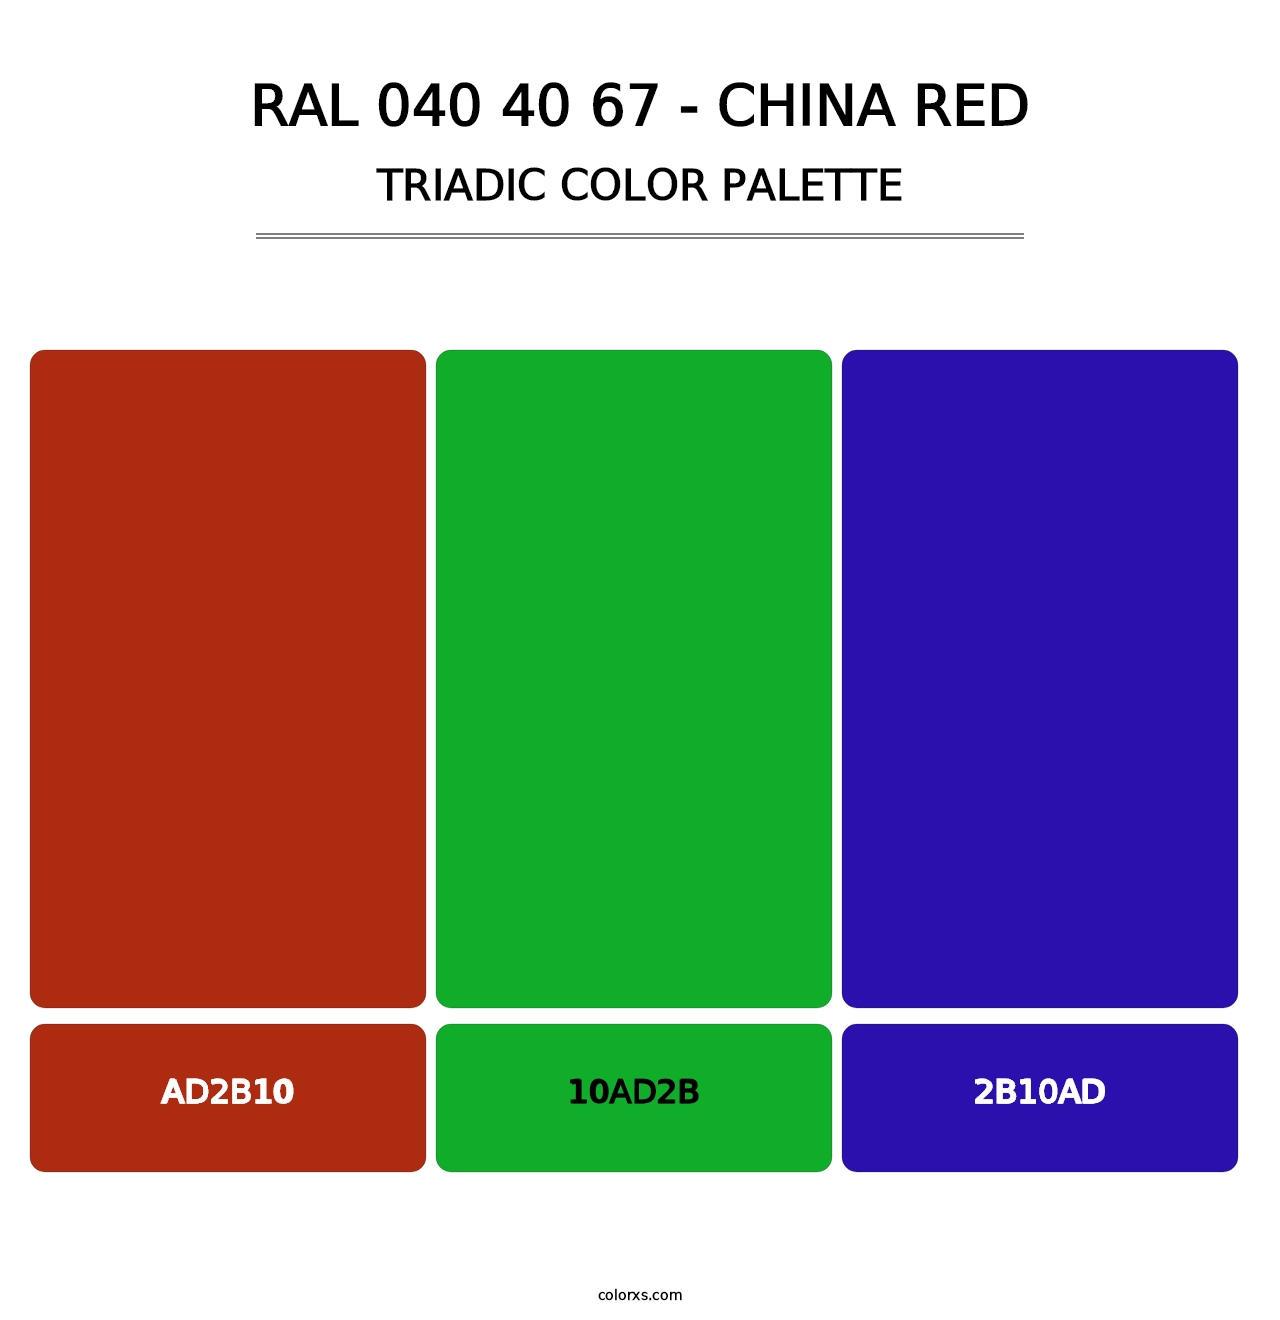 RAL 040 40 67 - China Red - Triadic Color Palette